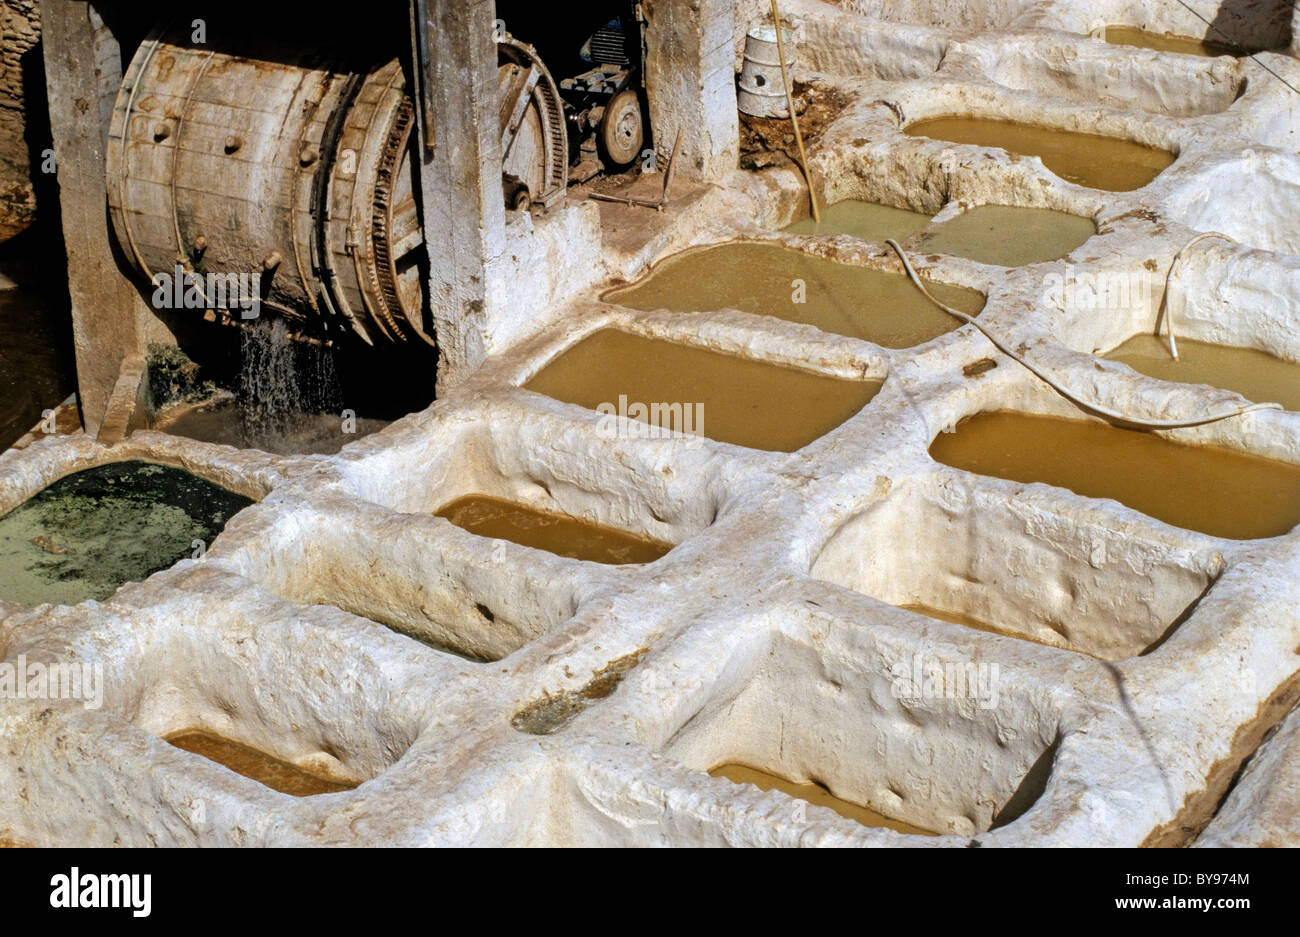 Vats and wooden paddle wheel at a tannery, El Bali, Fez, Morocco. Stock Photo